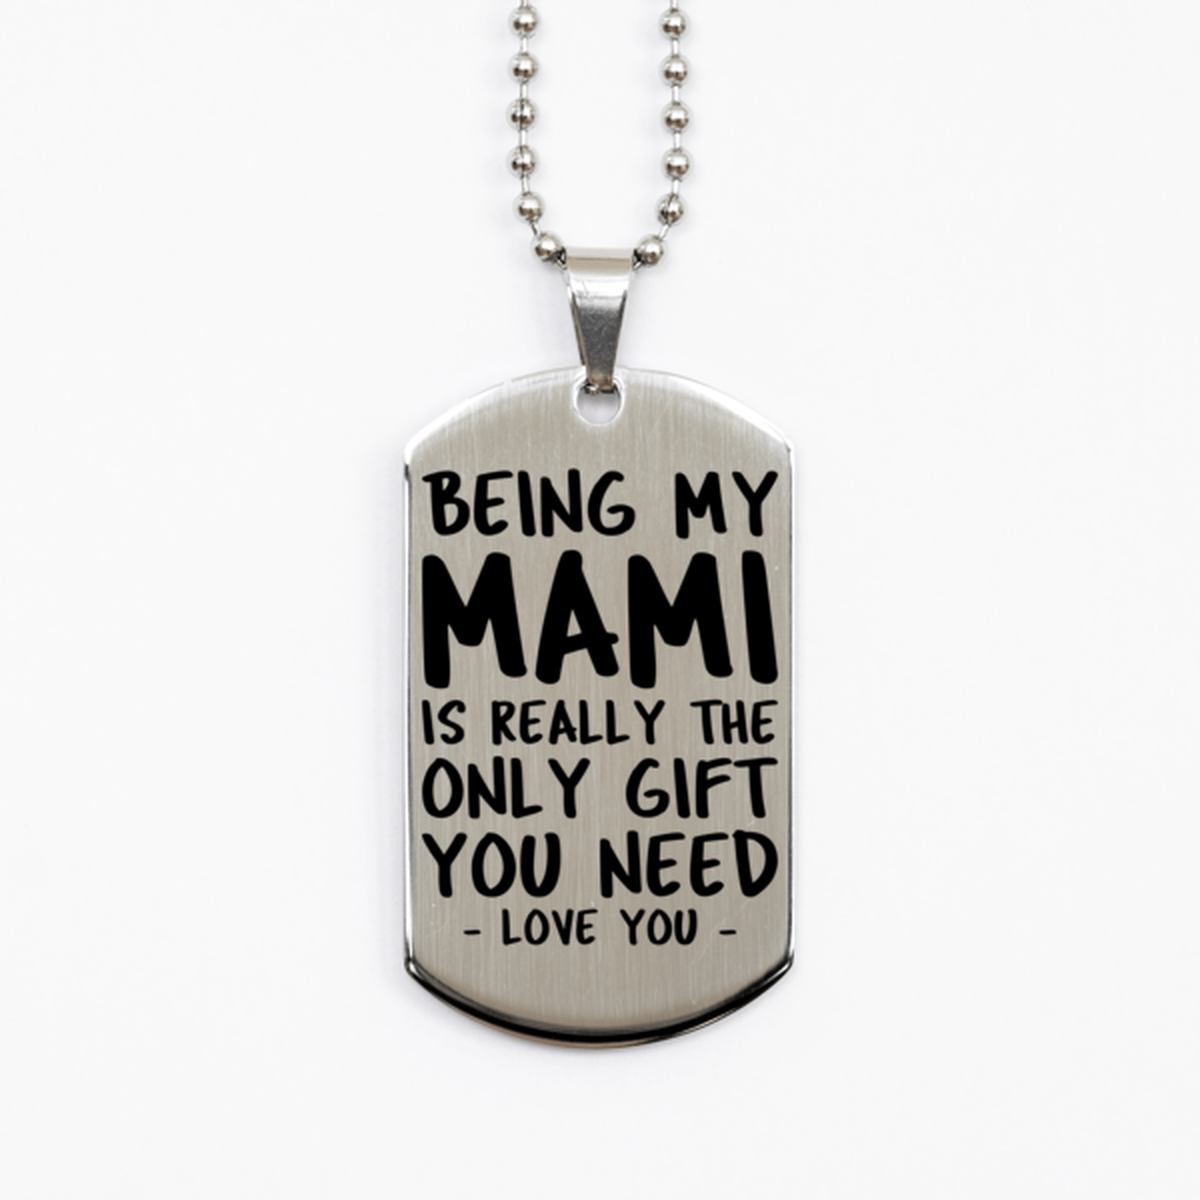 Funny Mami Silver Dog Tag Necklace, Being My Mami Is Really the Only Gift You Need, Best Birthday Gifts for Mami